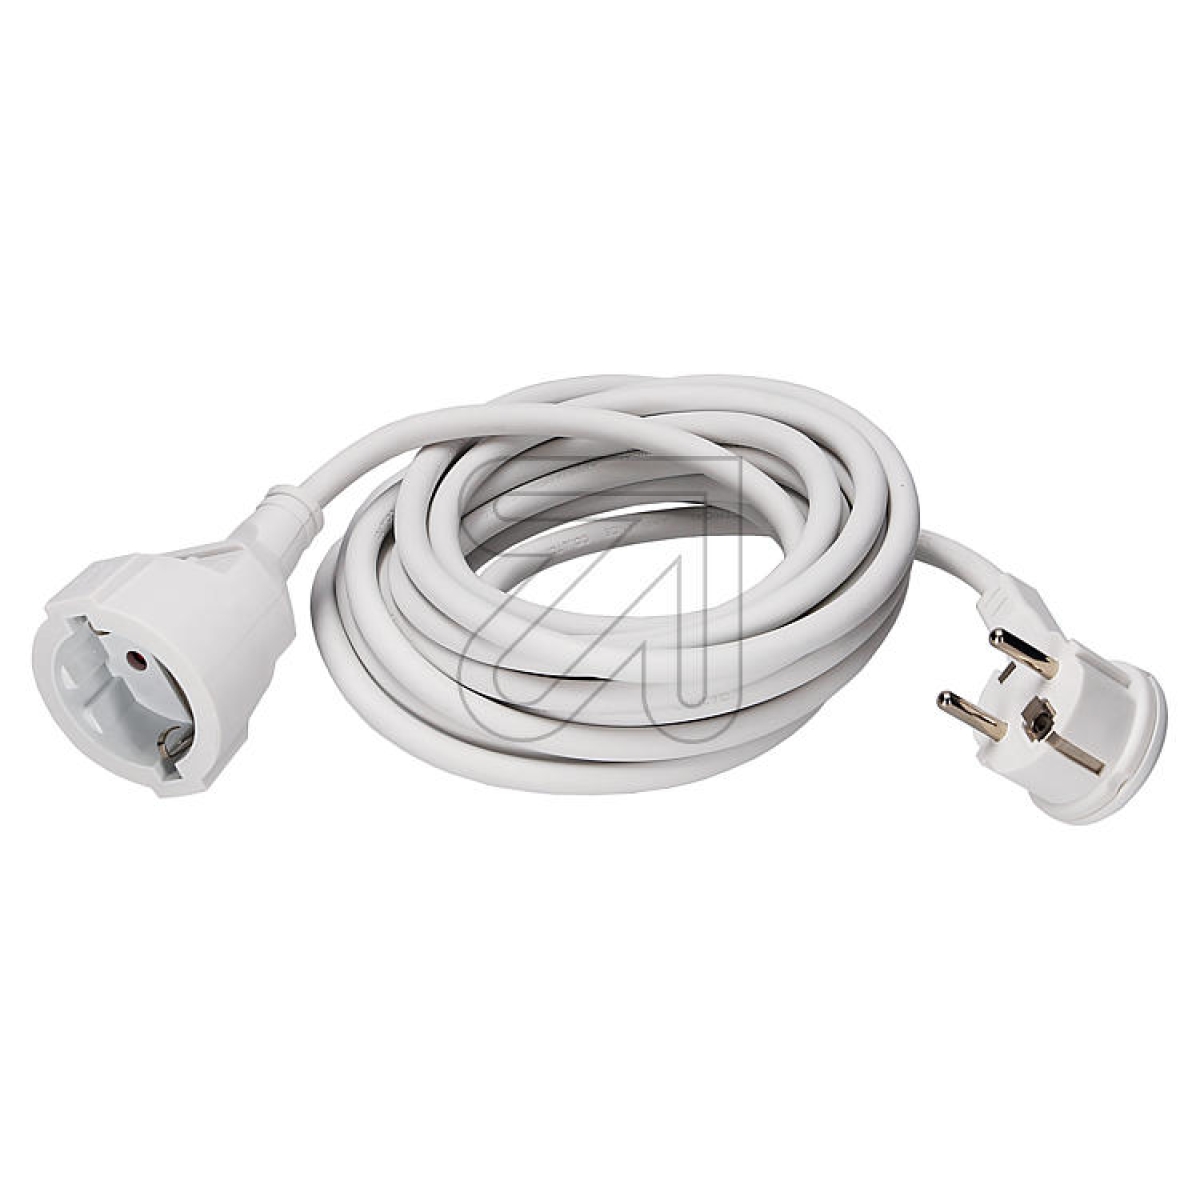 EGBExtension with flat plug, pure white 5mArticle-No: 041910